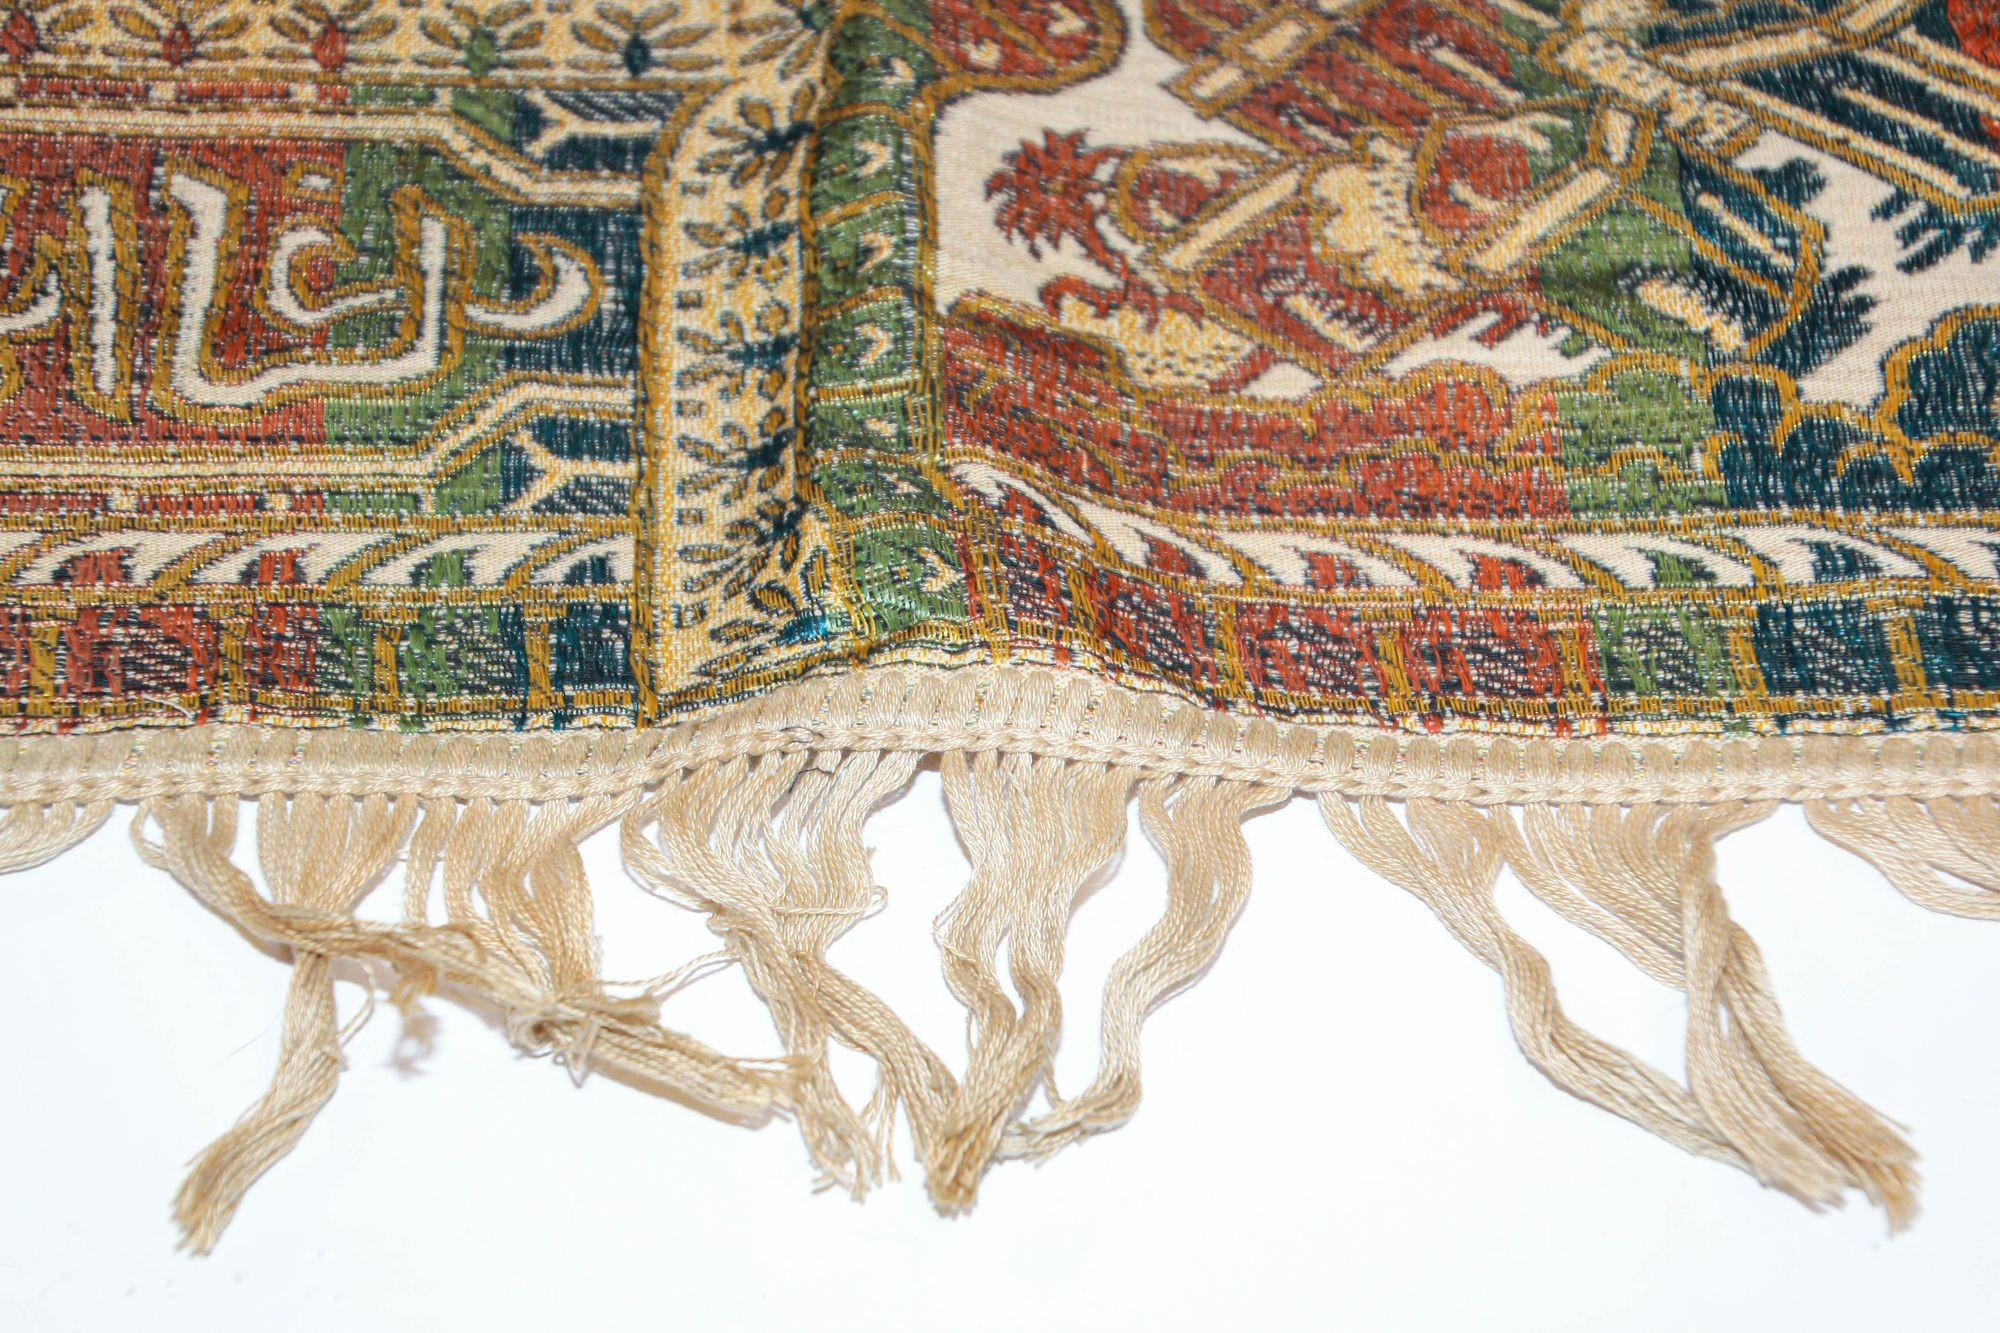 1940s Granada Islamic Spain Textile with Arabic Calligraphy Writing For Sale 7